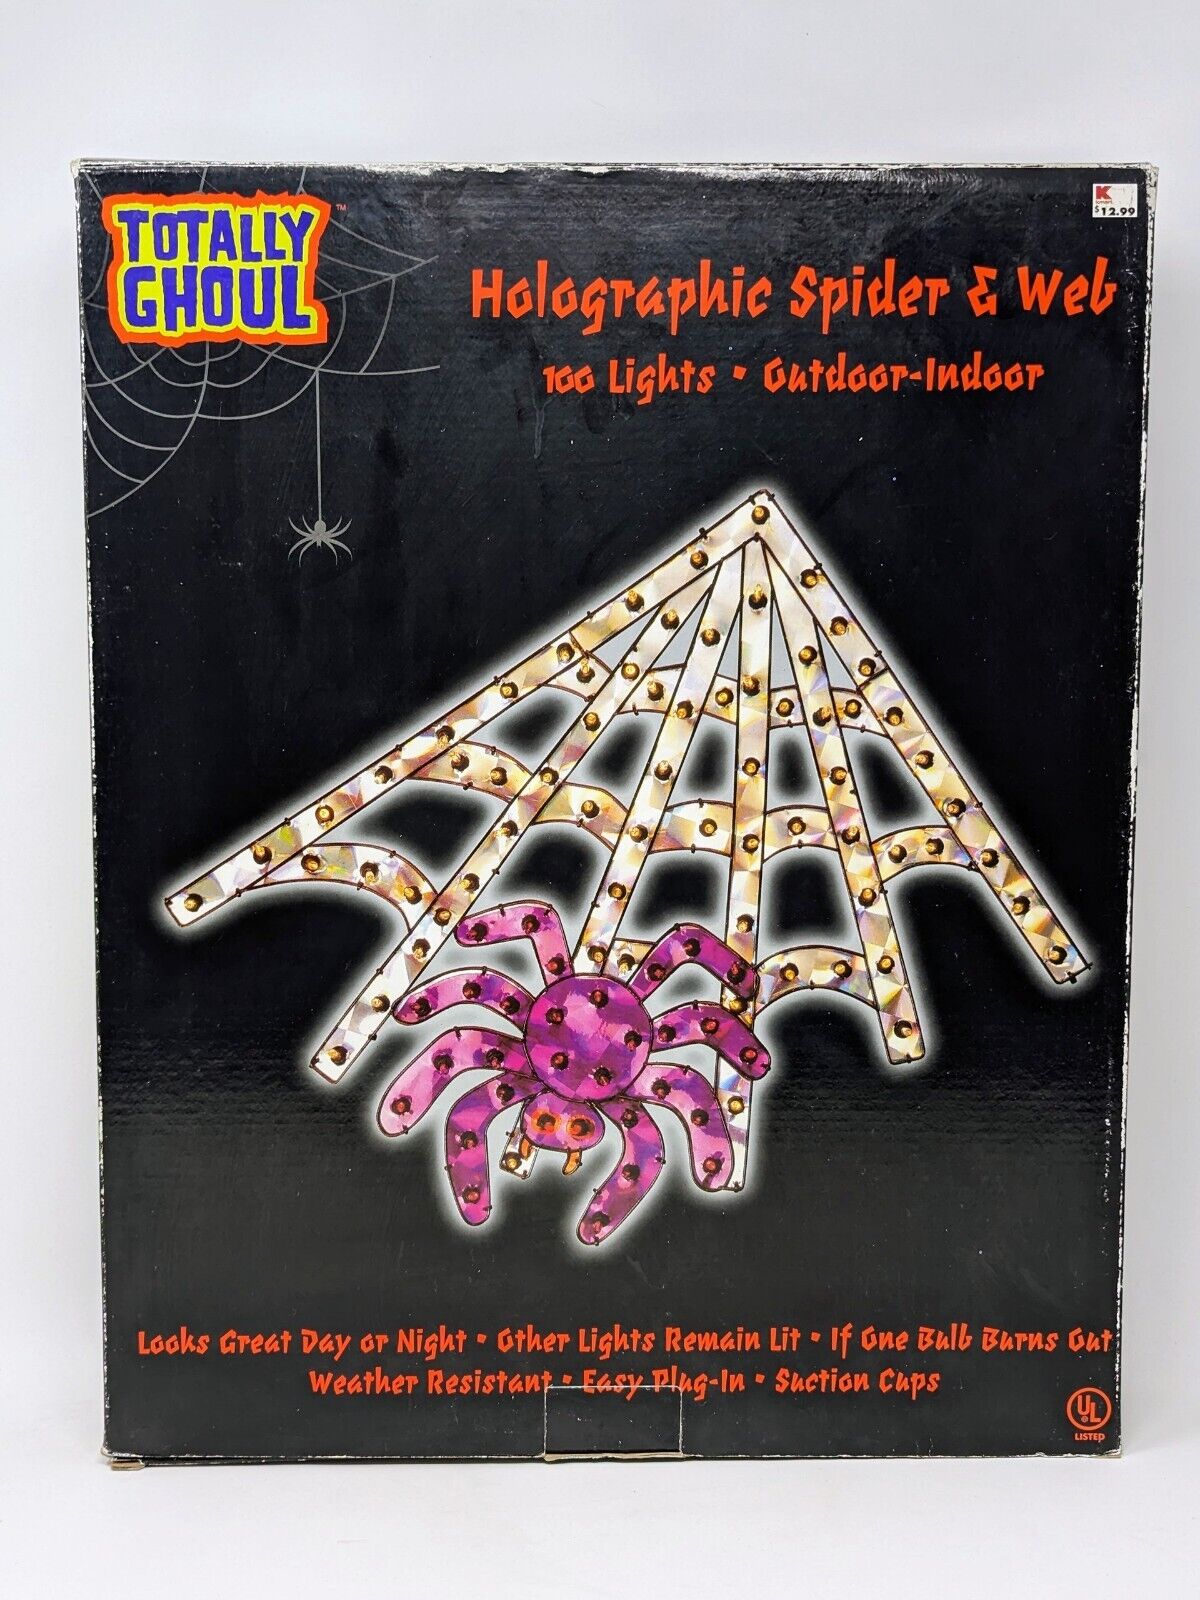 VTG Totally Ghoul Holographic Spider & Web 100 Lights Outdoor & Indoor Halloween